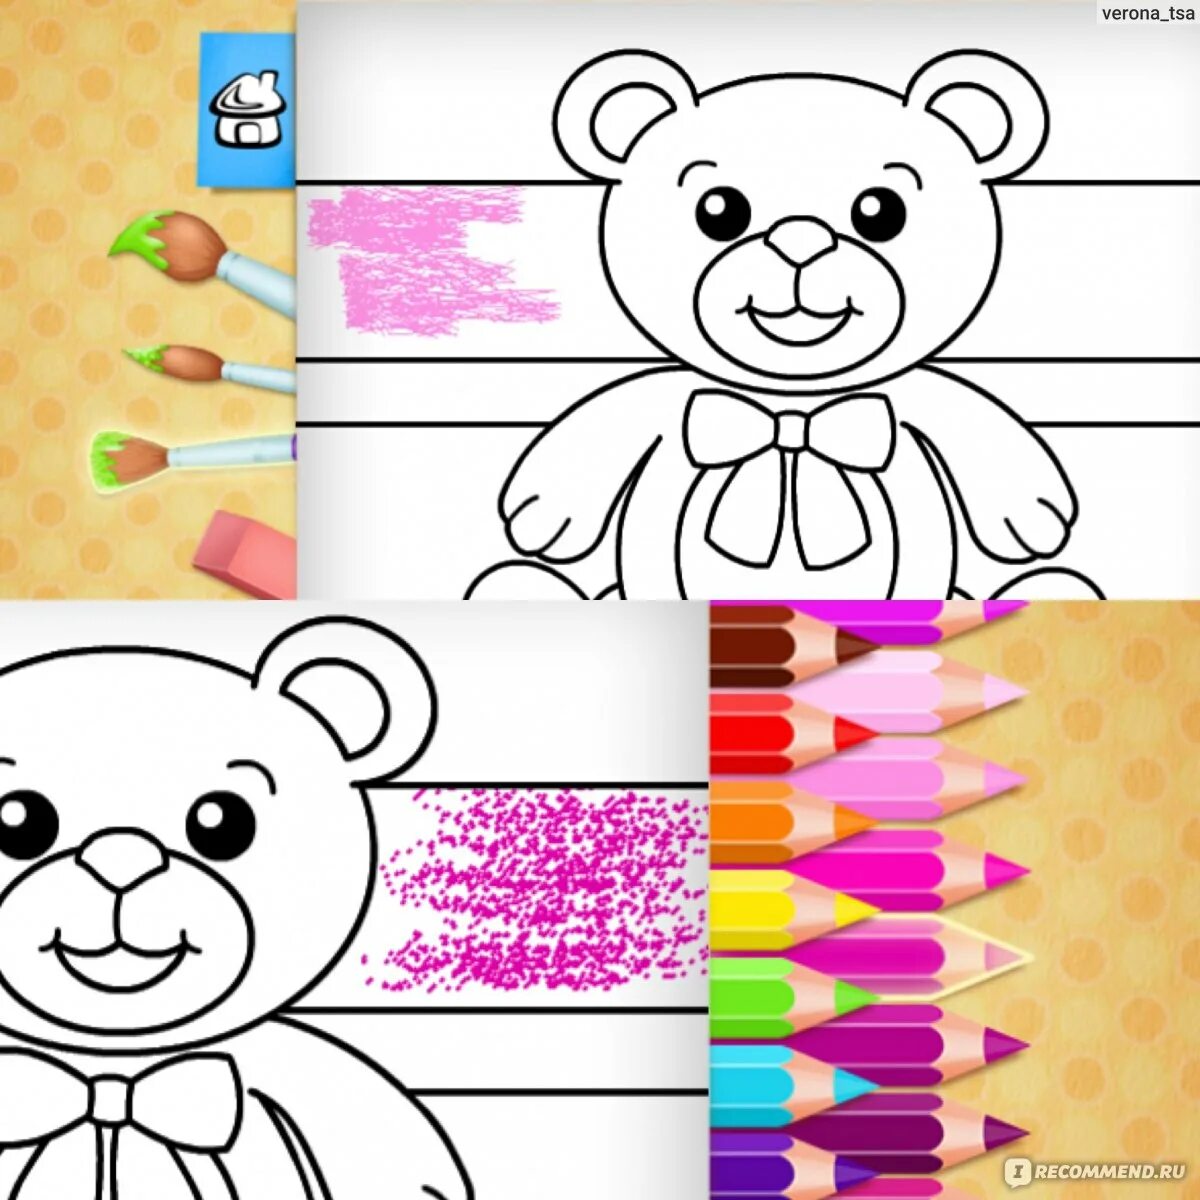 Fan colors energizing coloring game